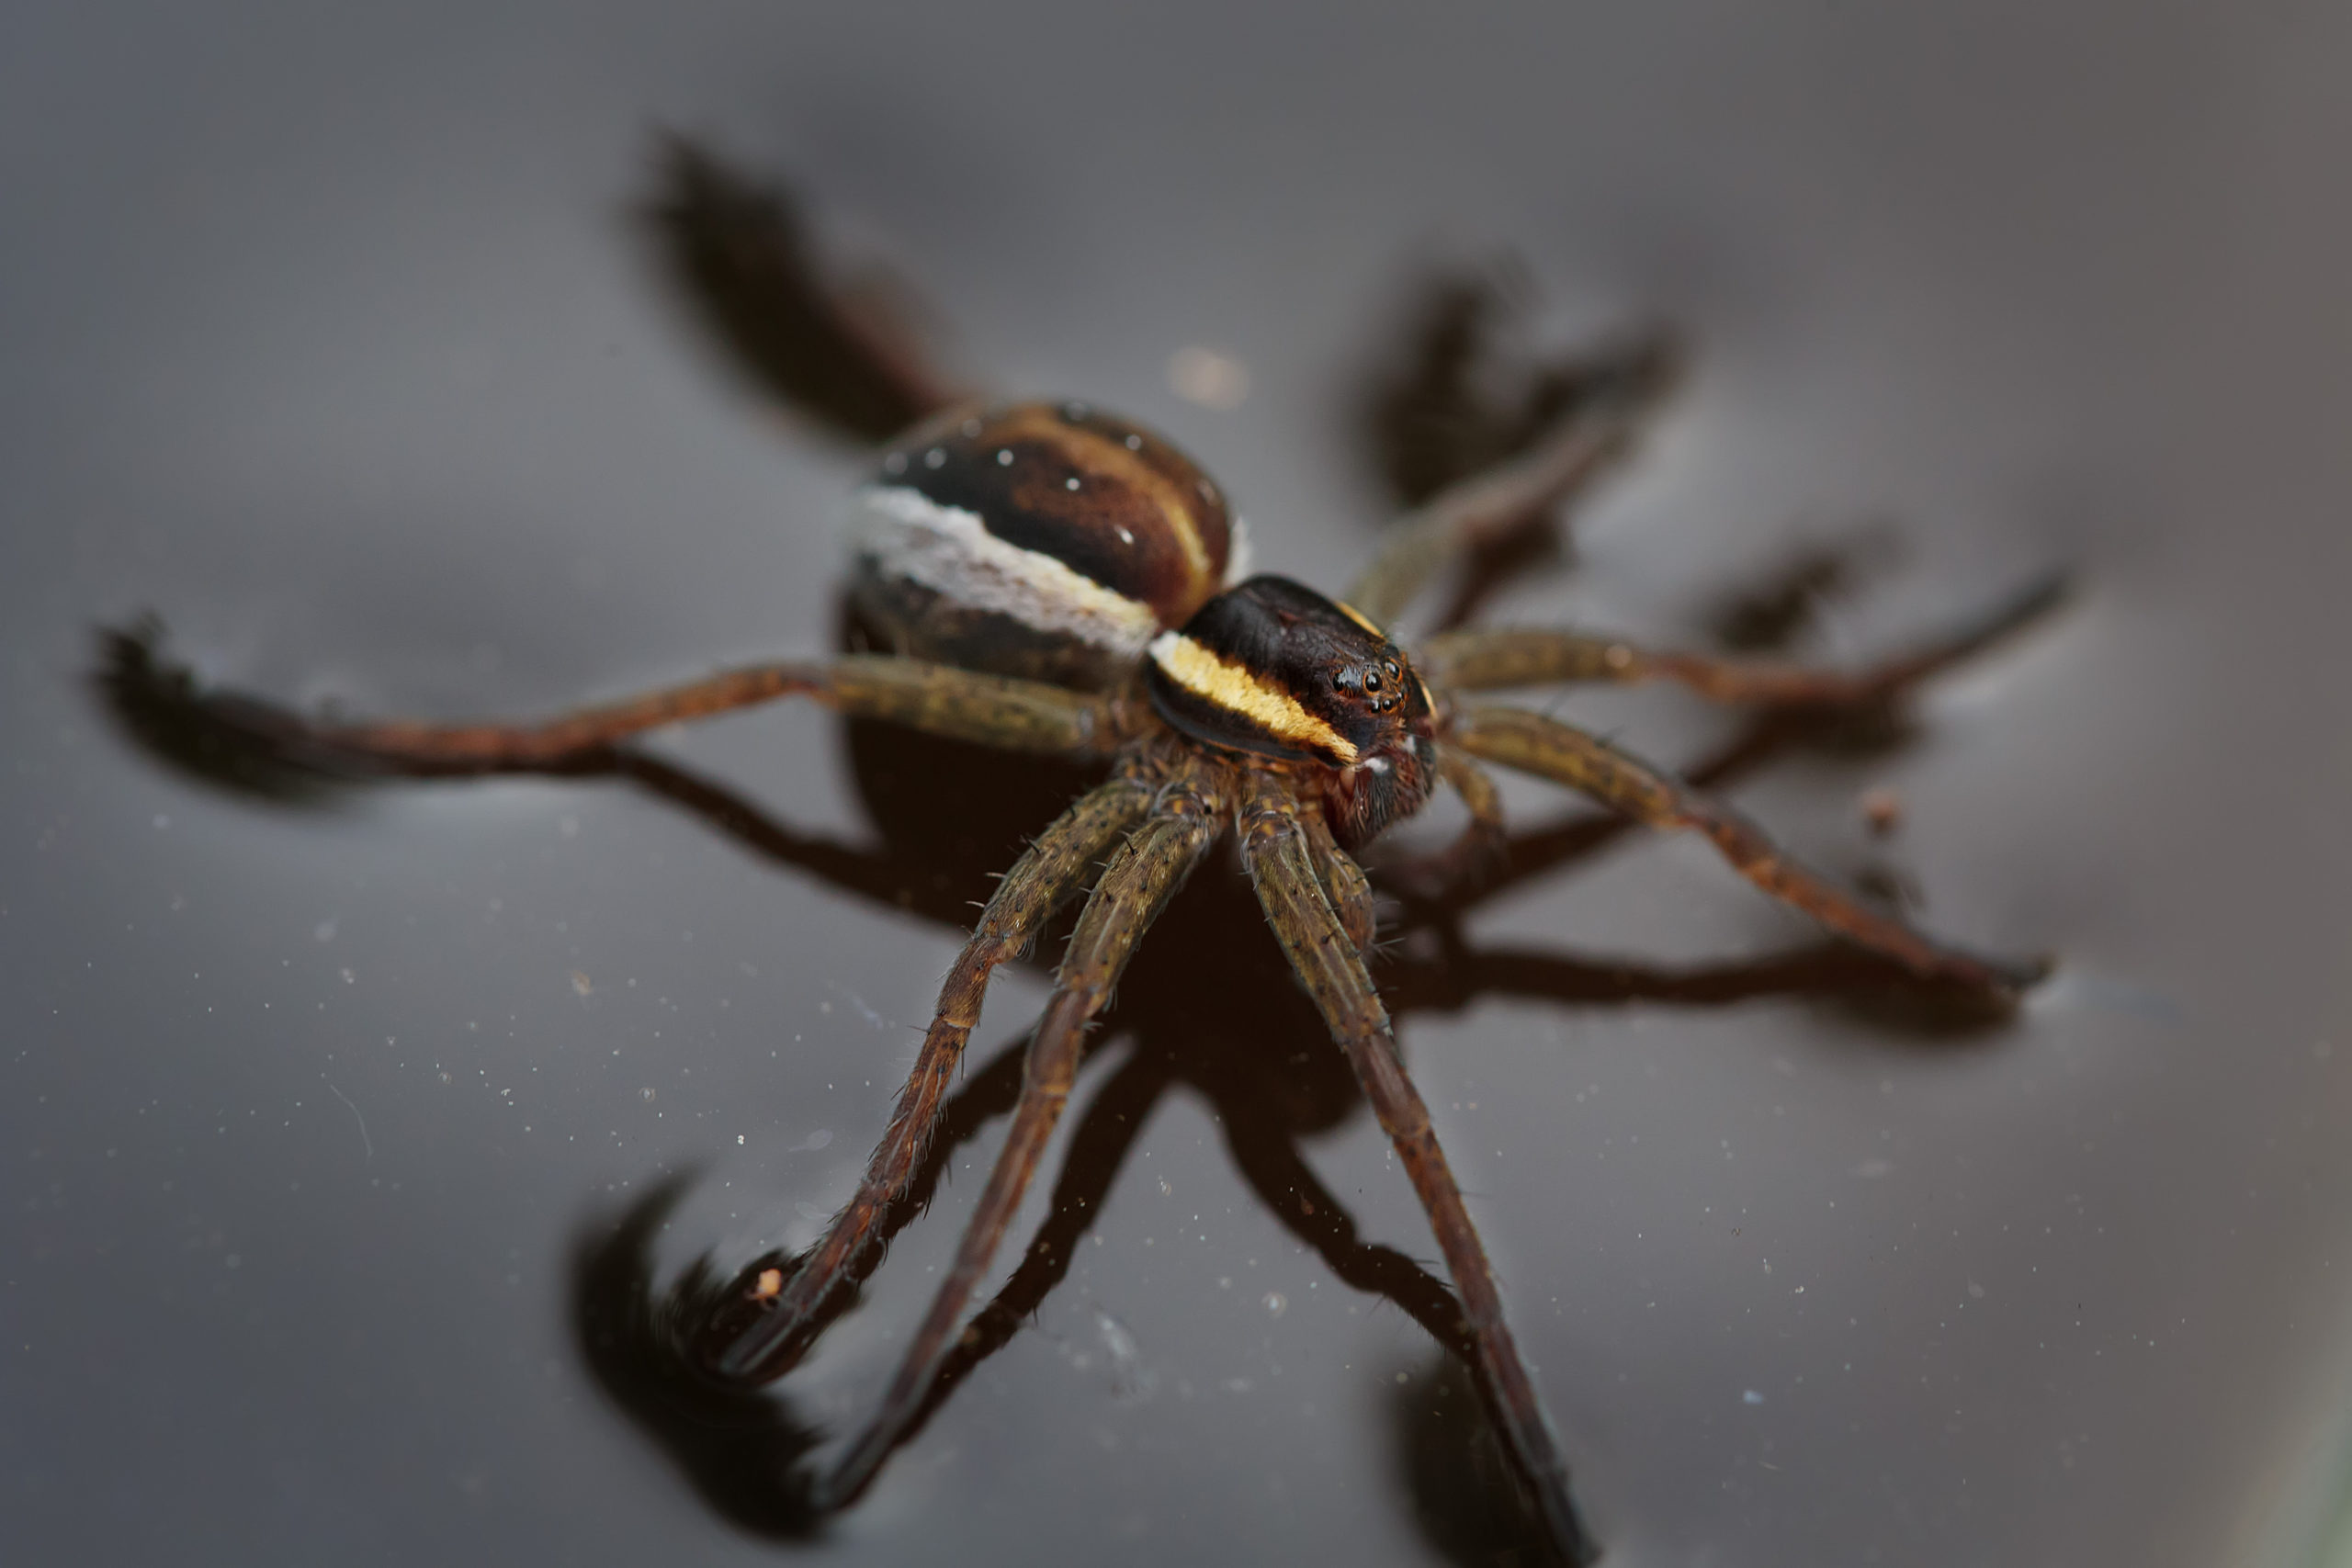 Water spiders are representing by Water beetle, notable for their divided eyes.